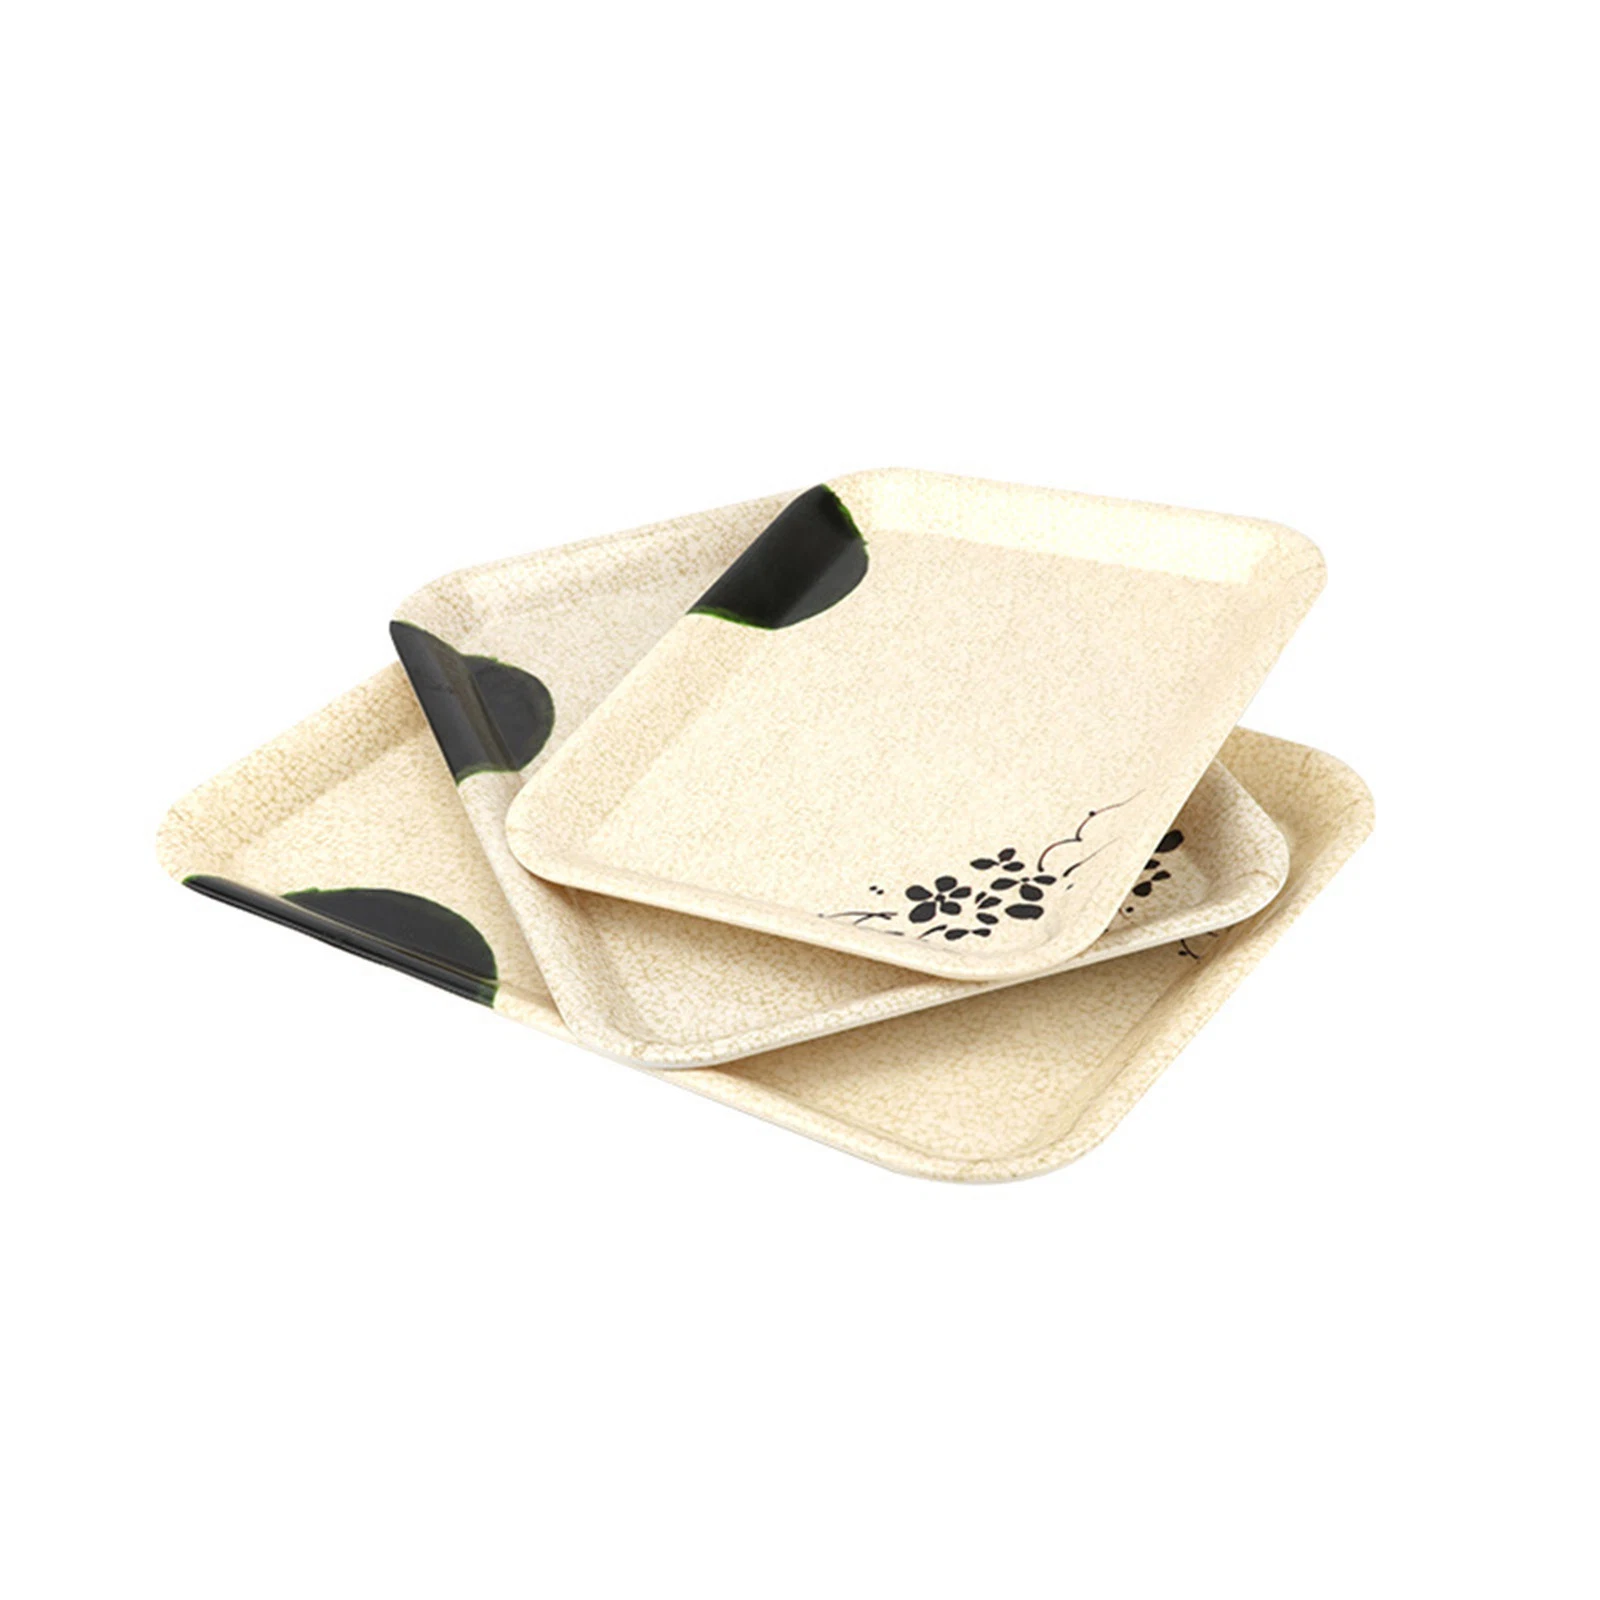 Plastic Tray for Airline Airline Food Trays Airline Tray Liners